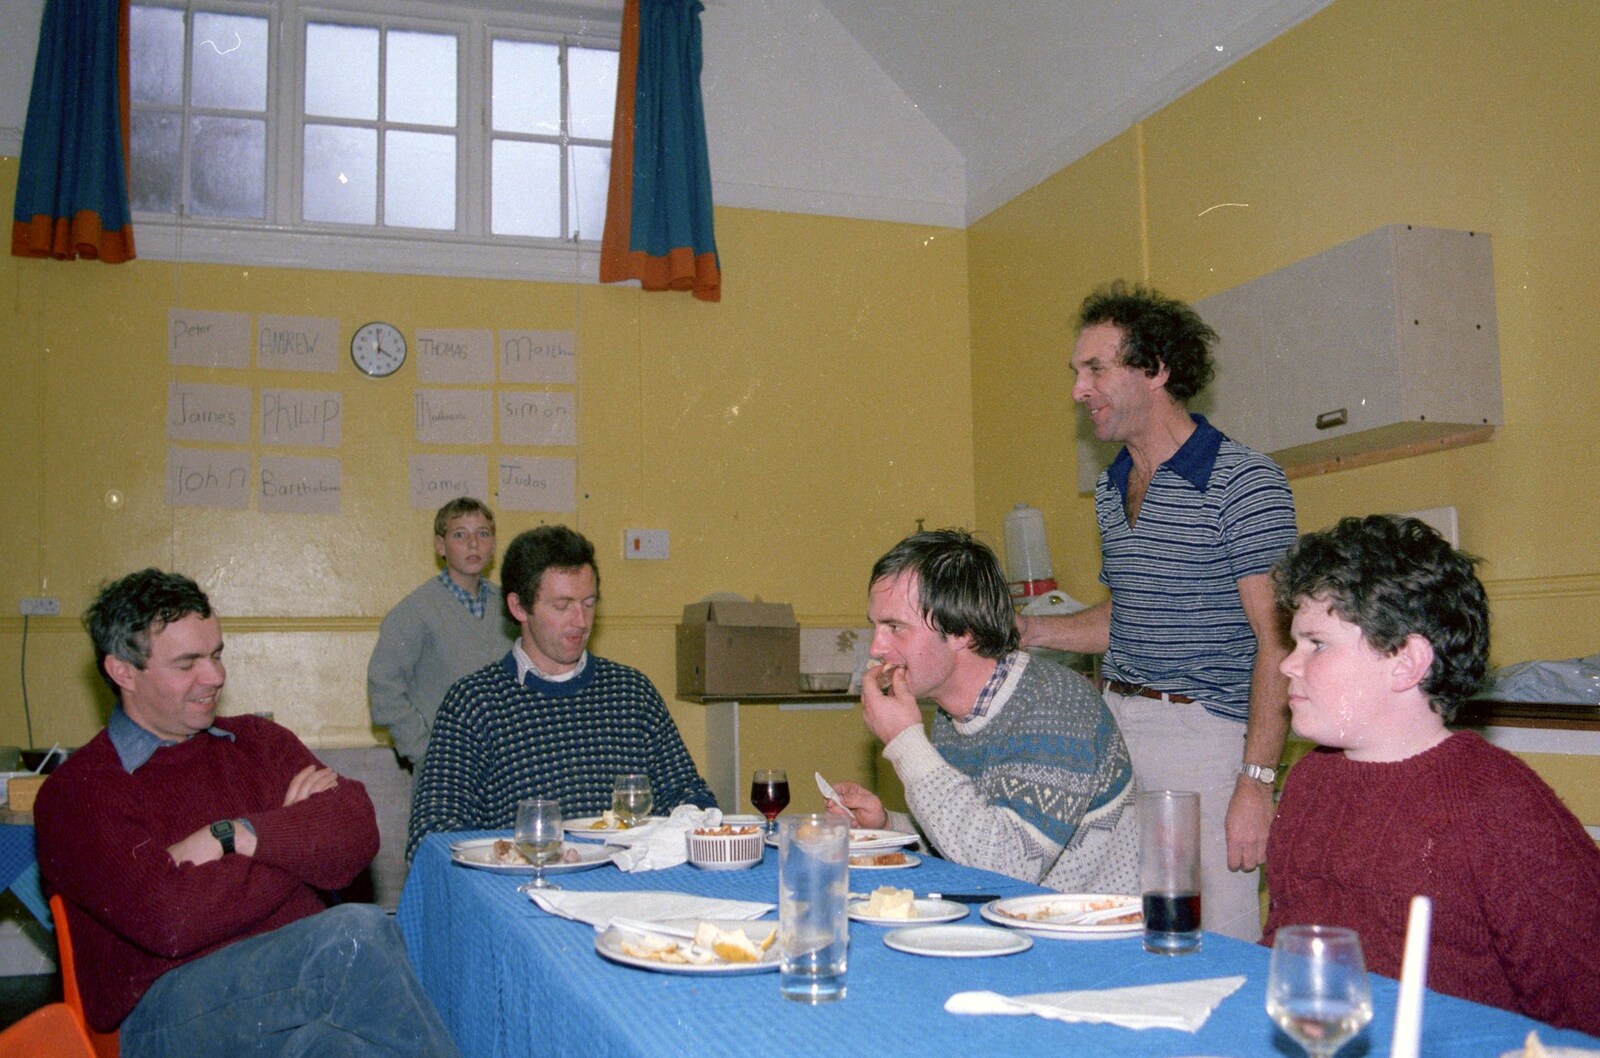 The grape-picking party in Bransgore Village Hall from Grape Picking and the Trip Back to Poly, Bransgore and London - 20th September 1986